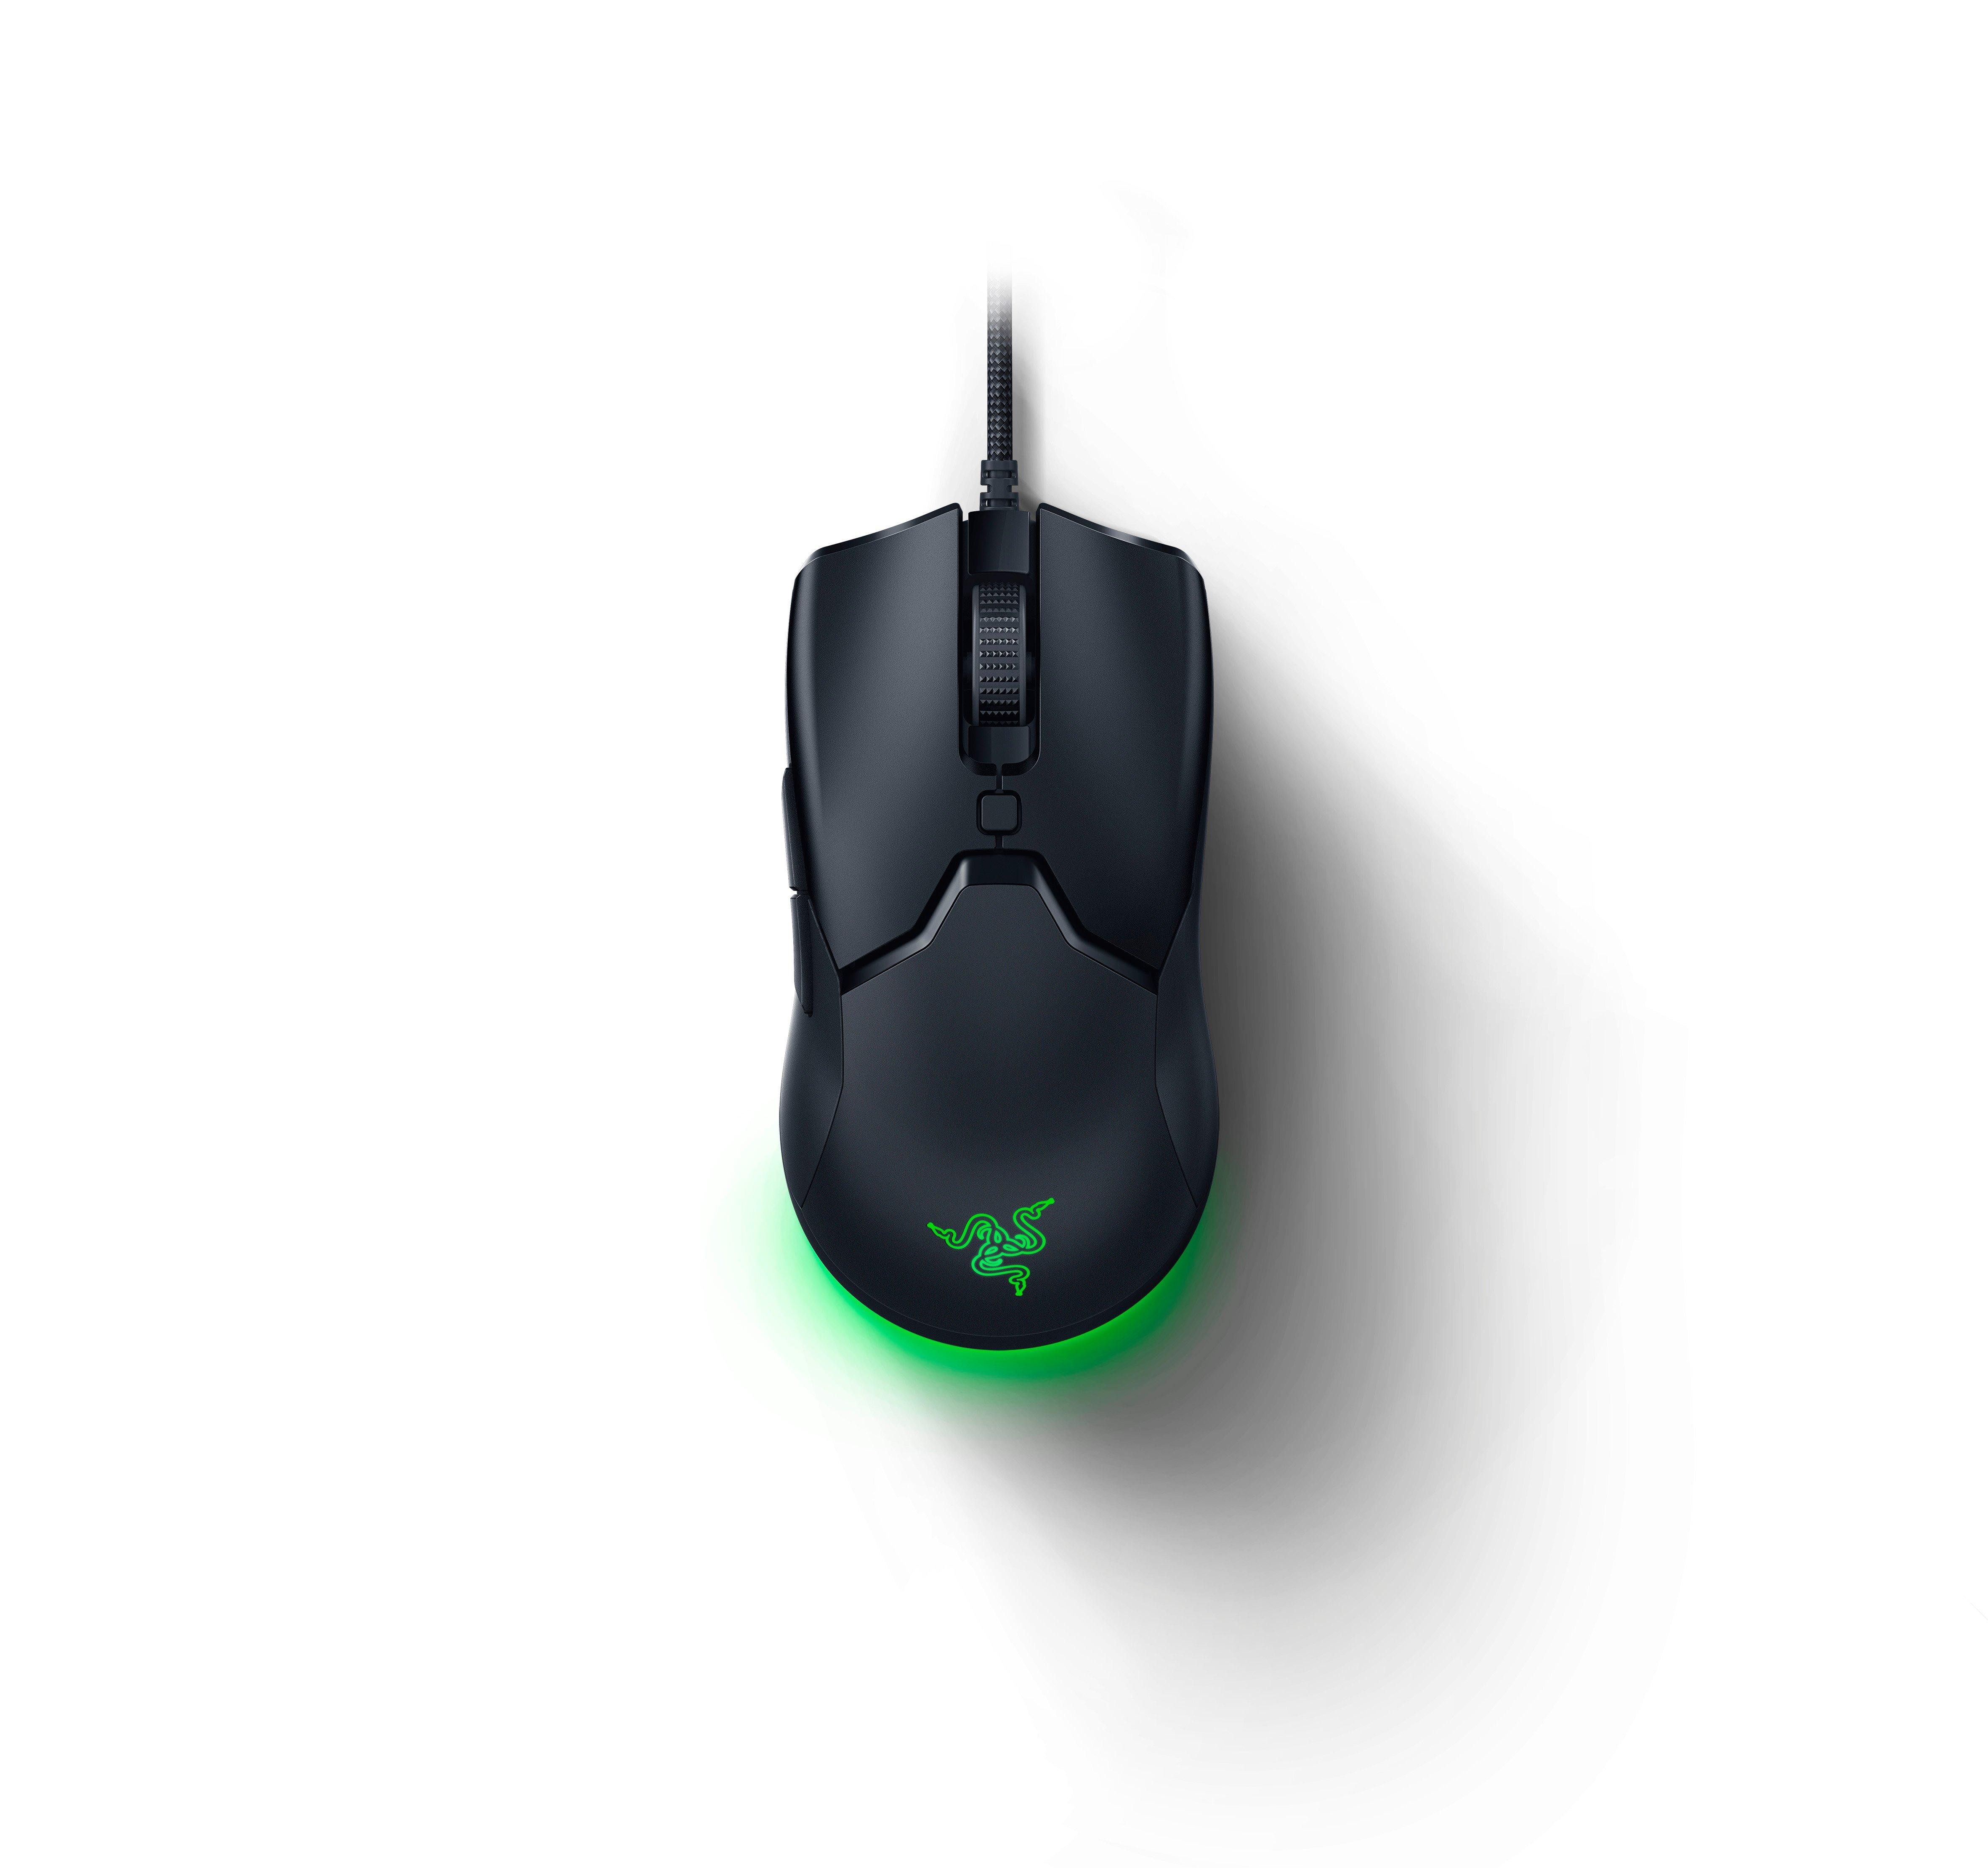 Razer Viper Mini Review - The Best Small Gaming Mouse